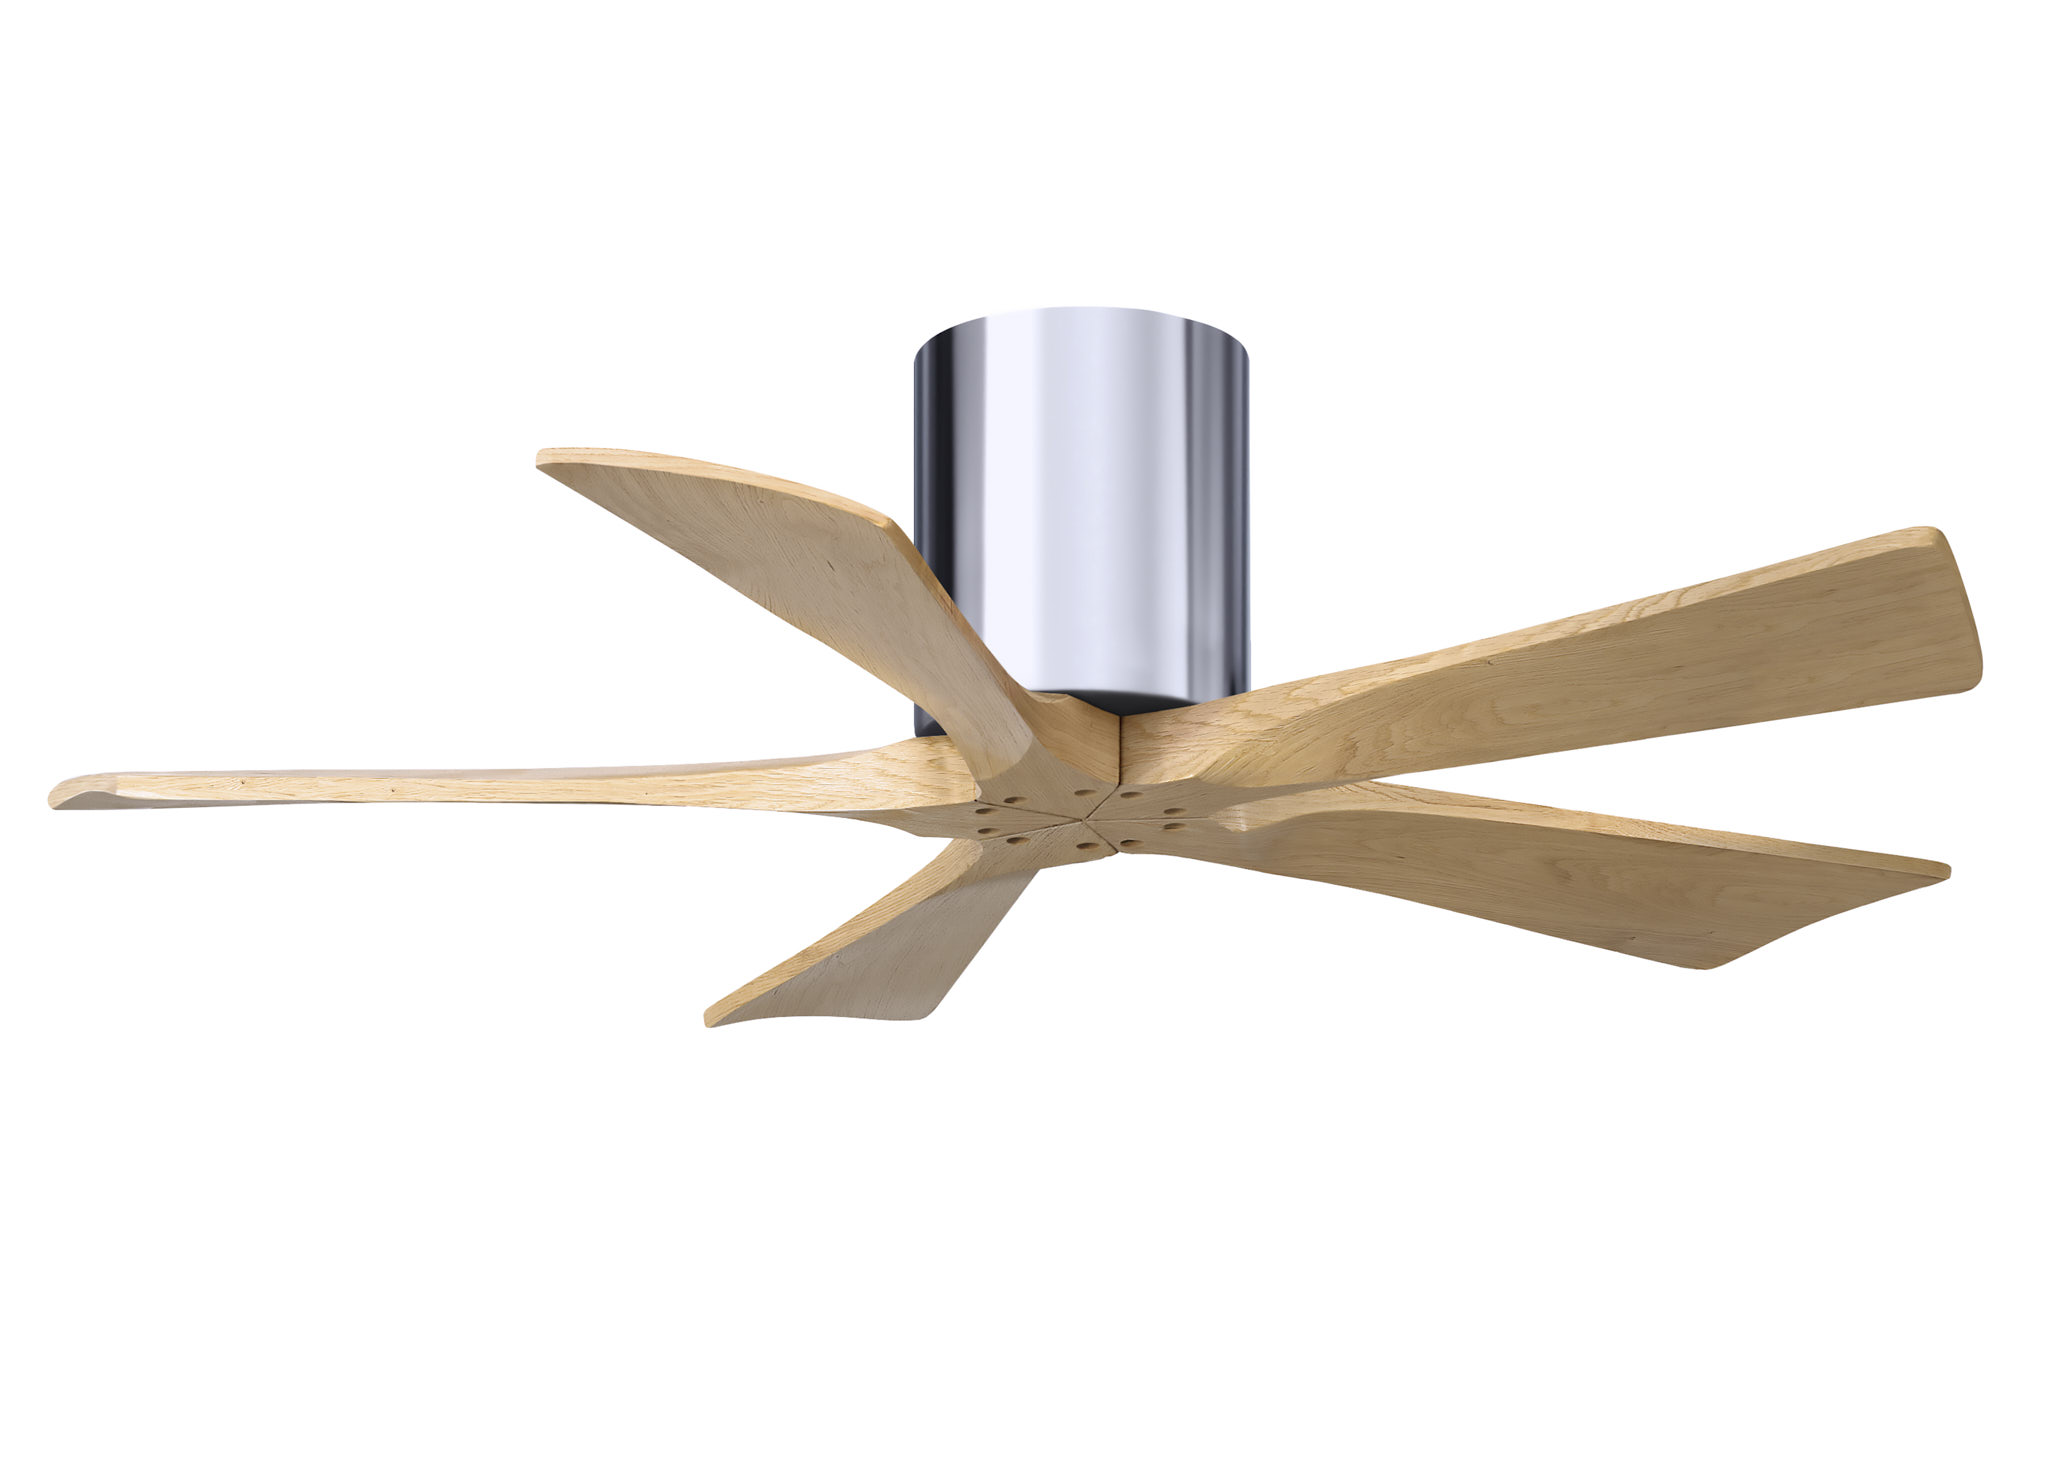 Irene-5H 6-speed ceiling fan in polished chrome finish with 42